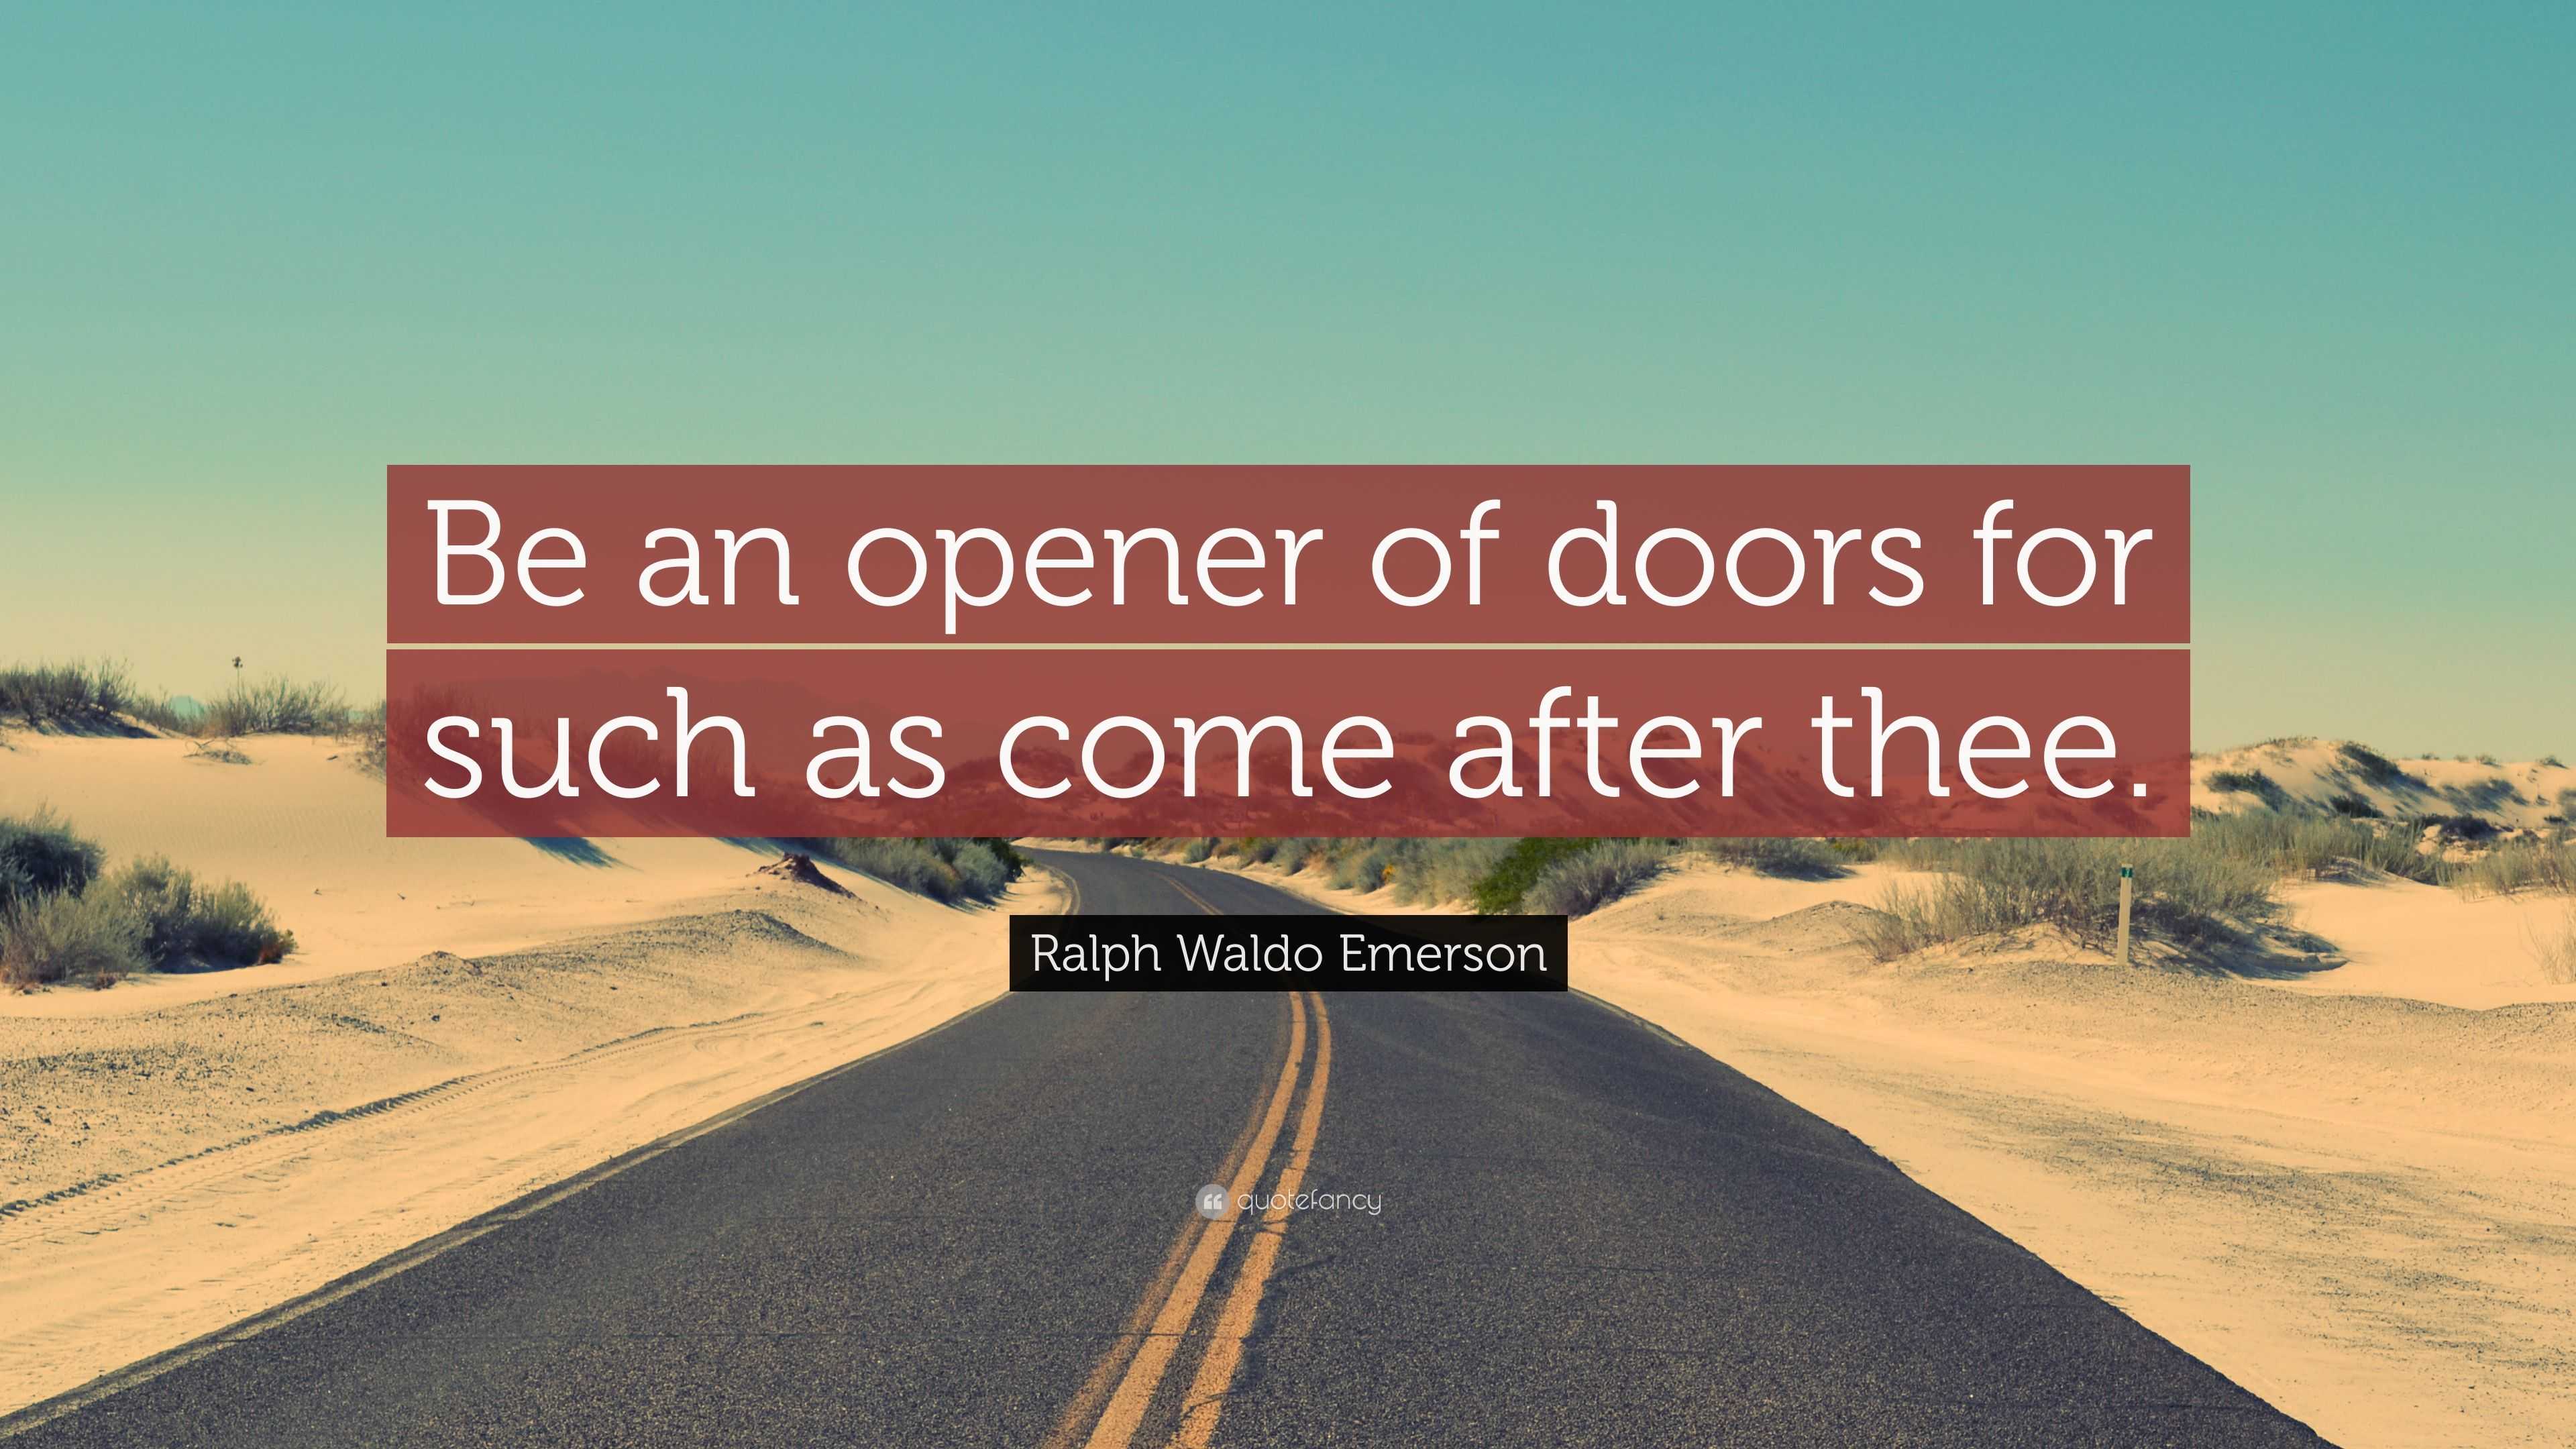 https://quotefancy.com/media/wallpaper/3840x2160/5353249-Ralph-Waldo-Emerson-Quote-Be-an-opener-of-doors-for-such-as-come.jpg